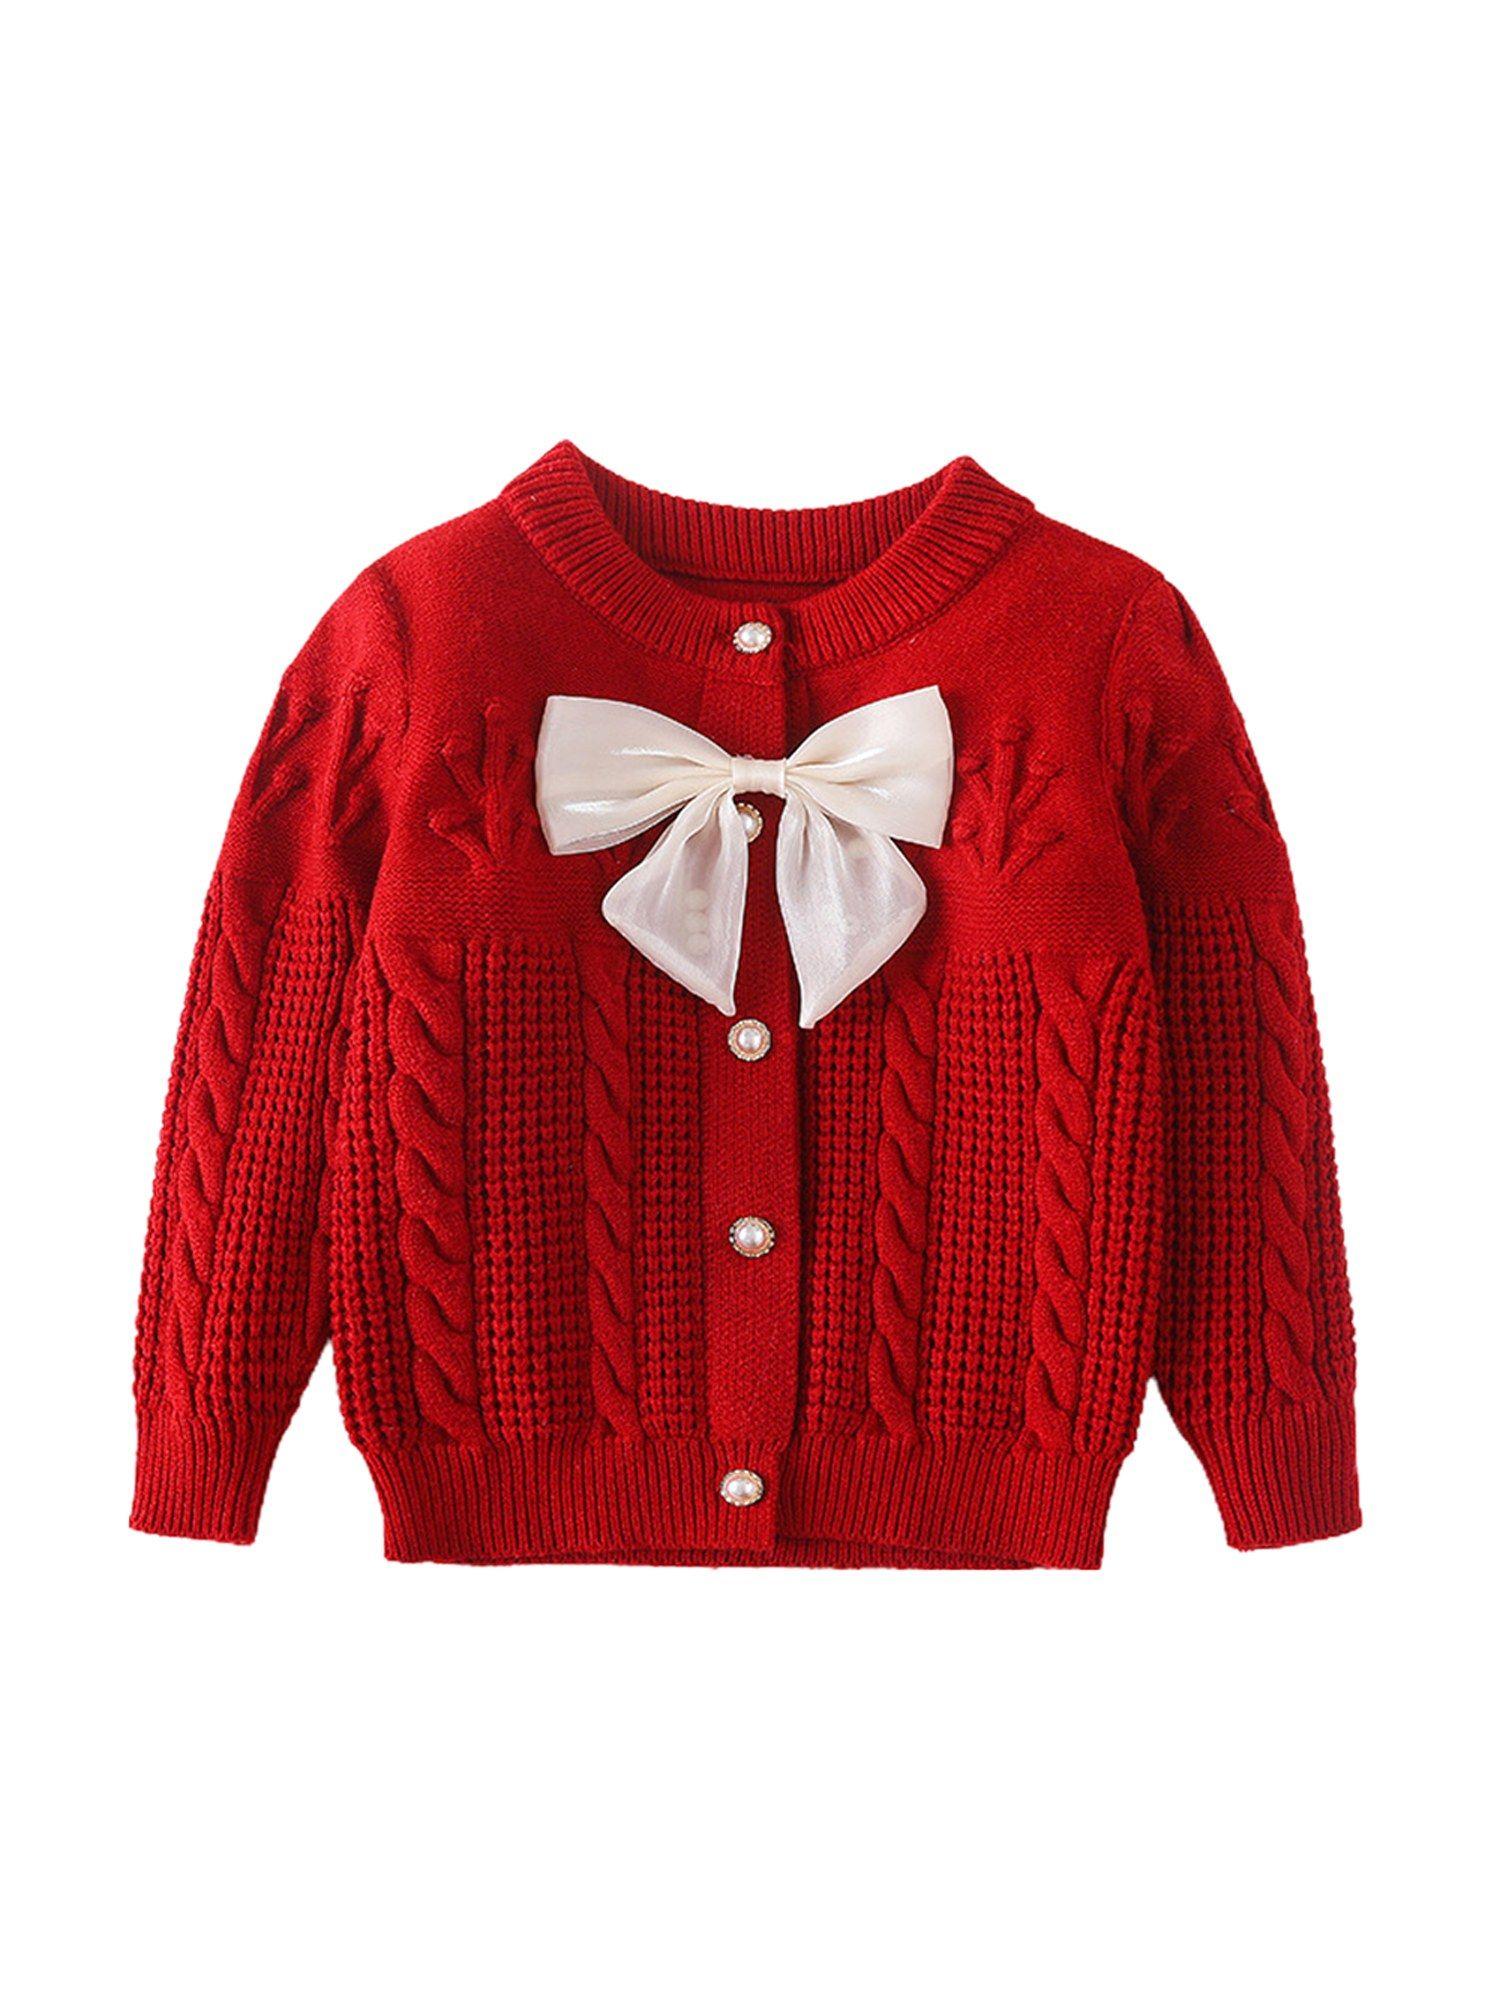 Kids Red Knitted Cardigan Sweater With Bow